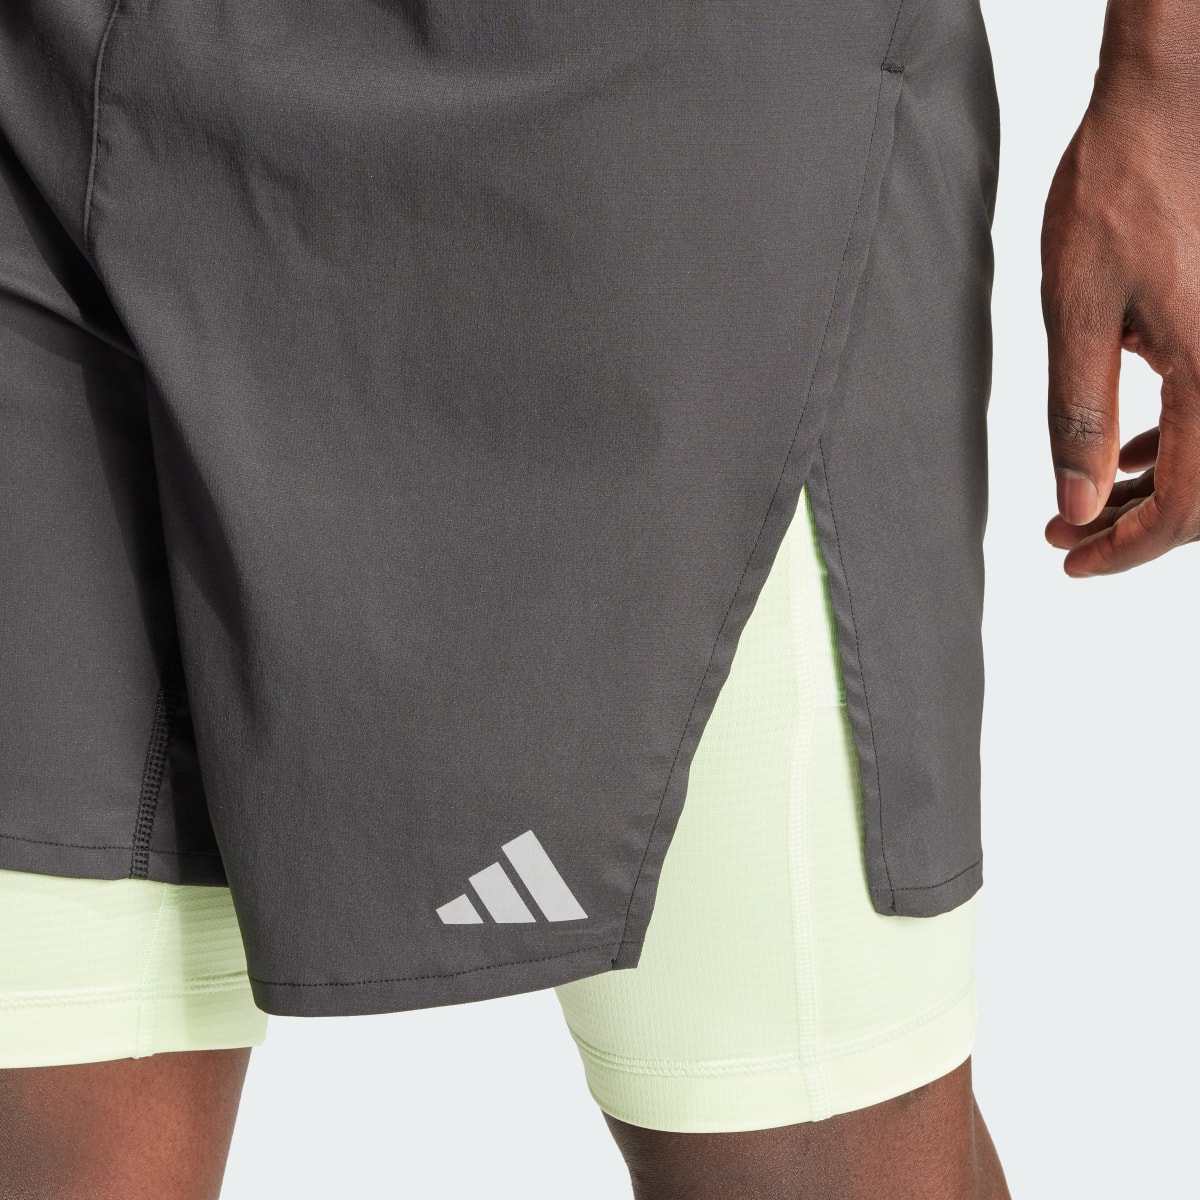 Adidas HIIT Workout HEAT.RDY 2-in-1 Shorts. 5